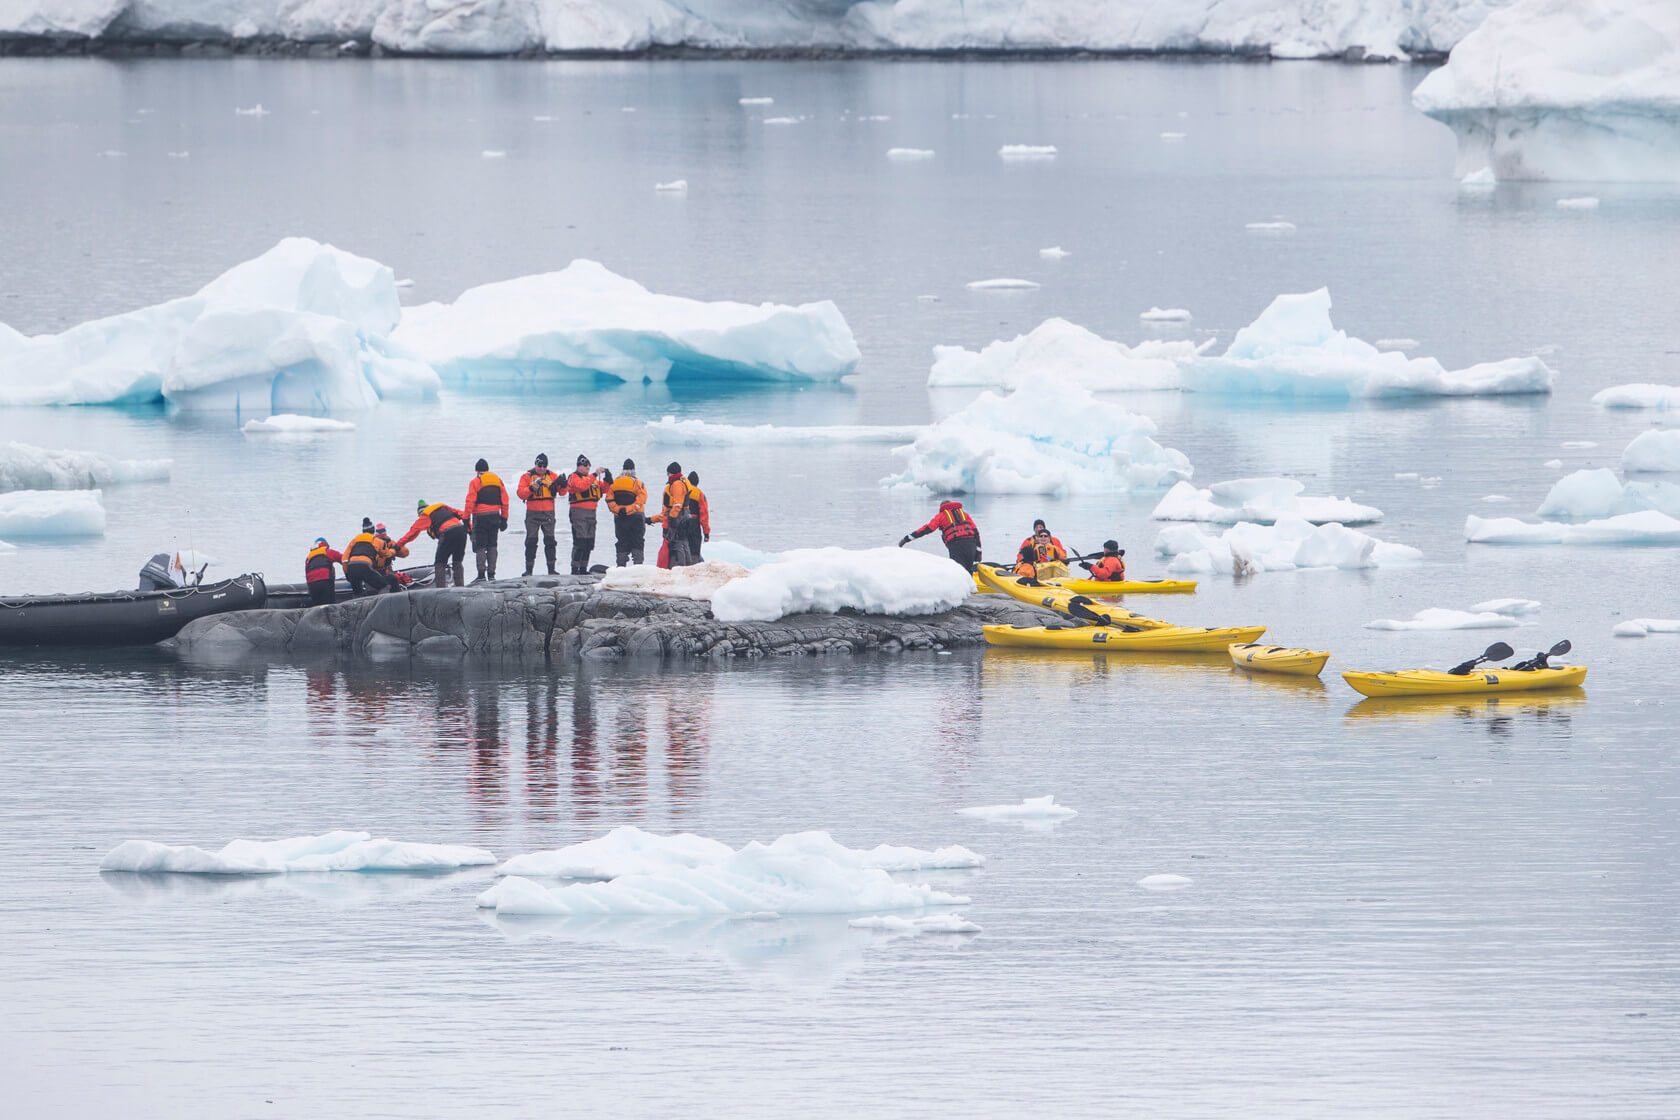 Seabourn passengers find footing and move from their inflatable boat and into kayaks.